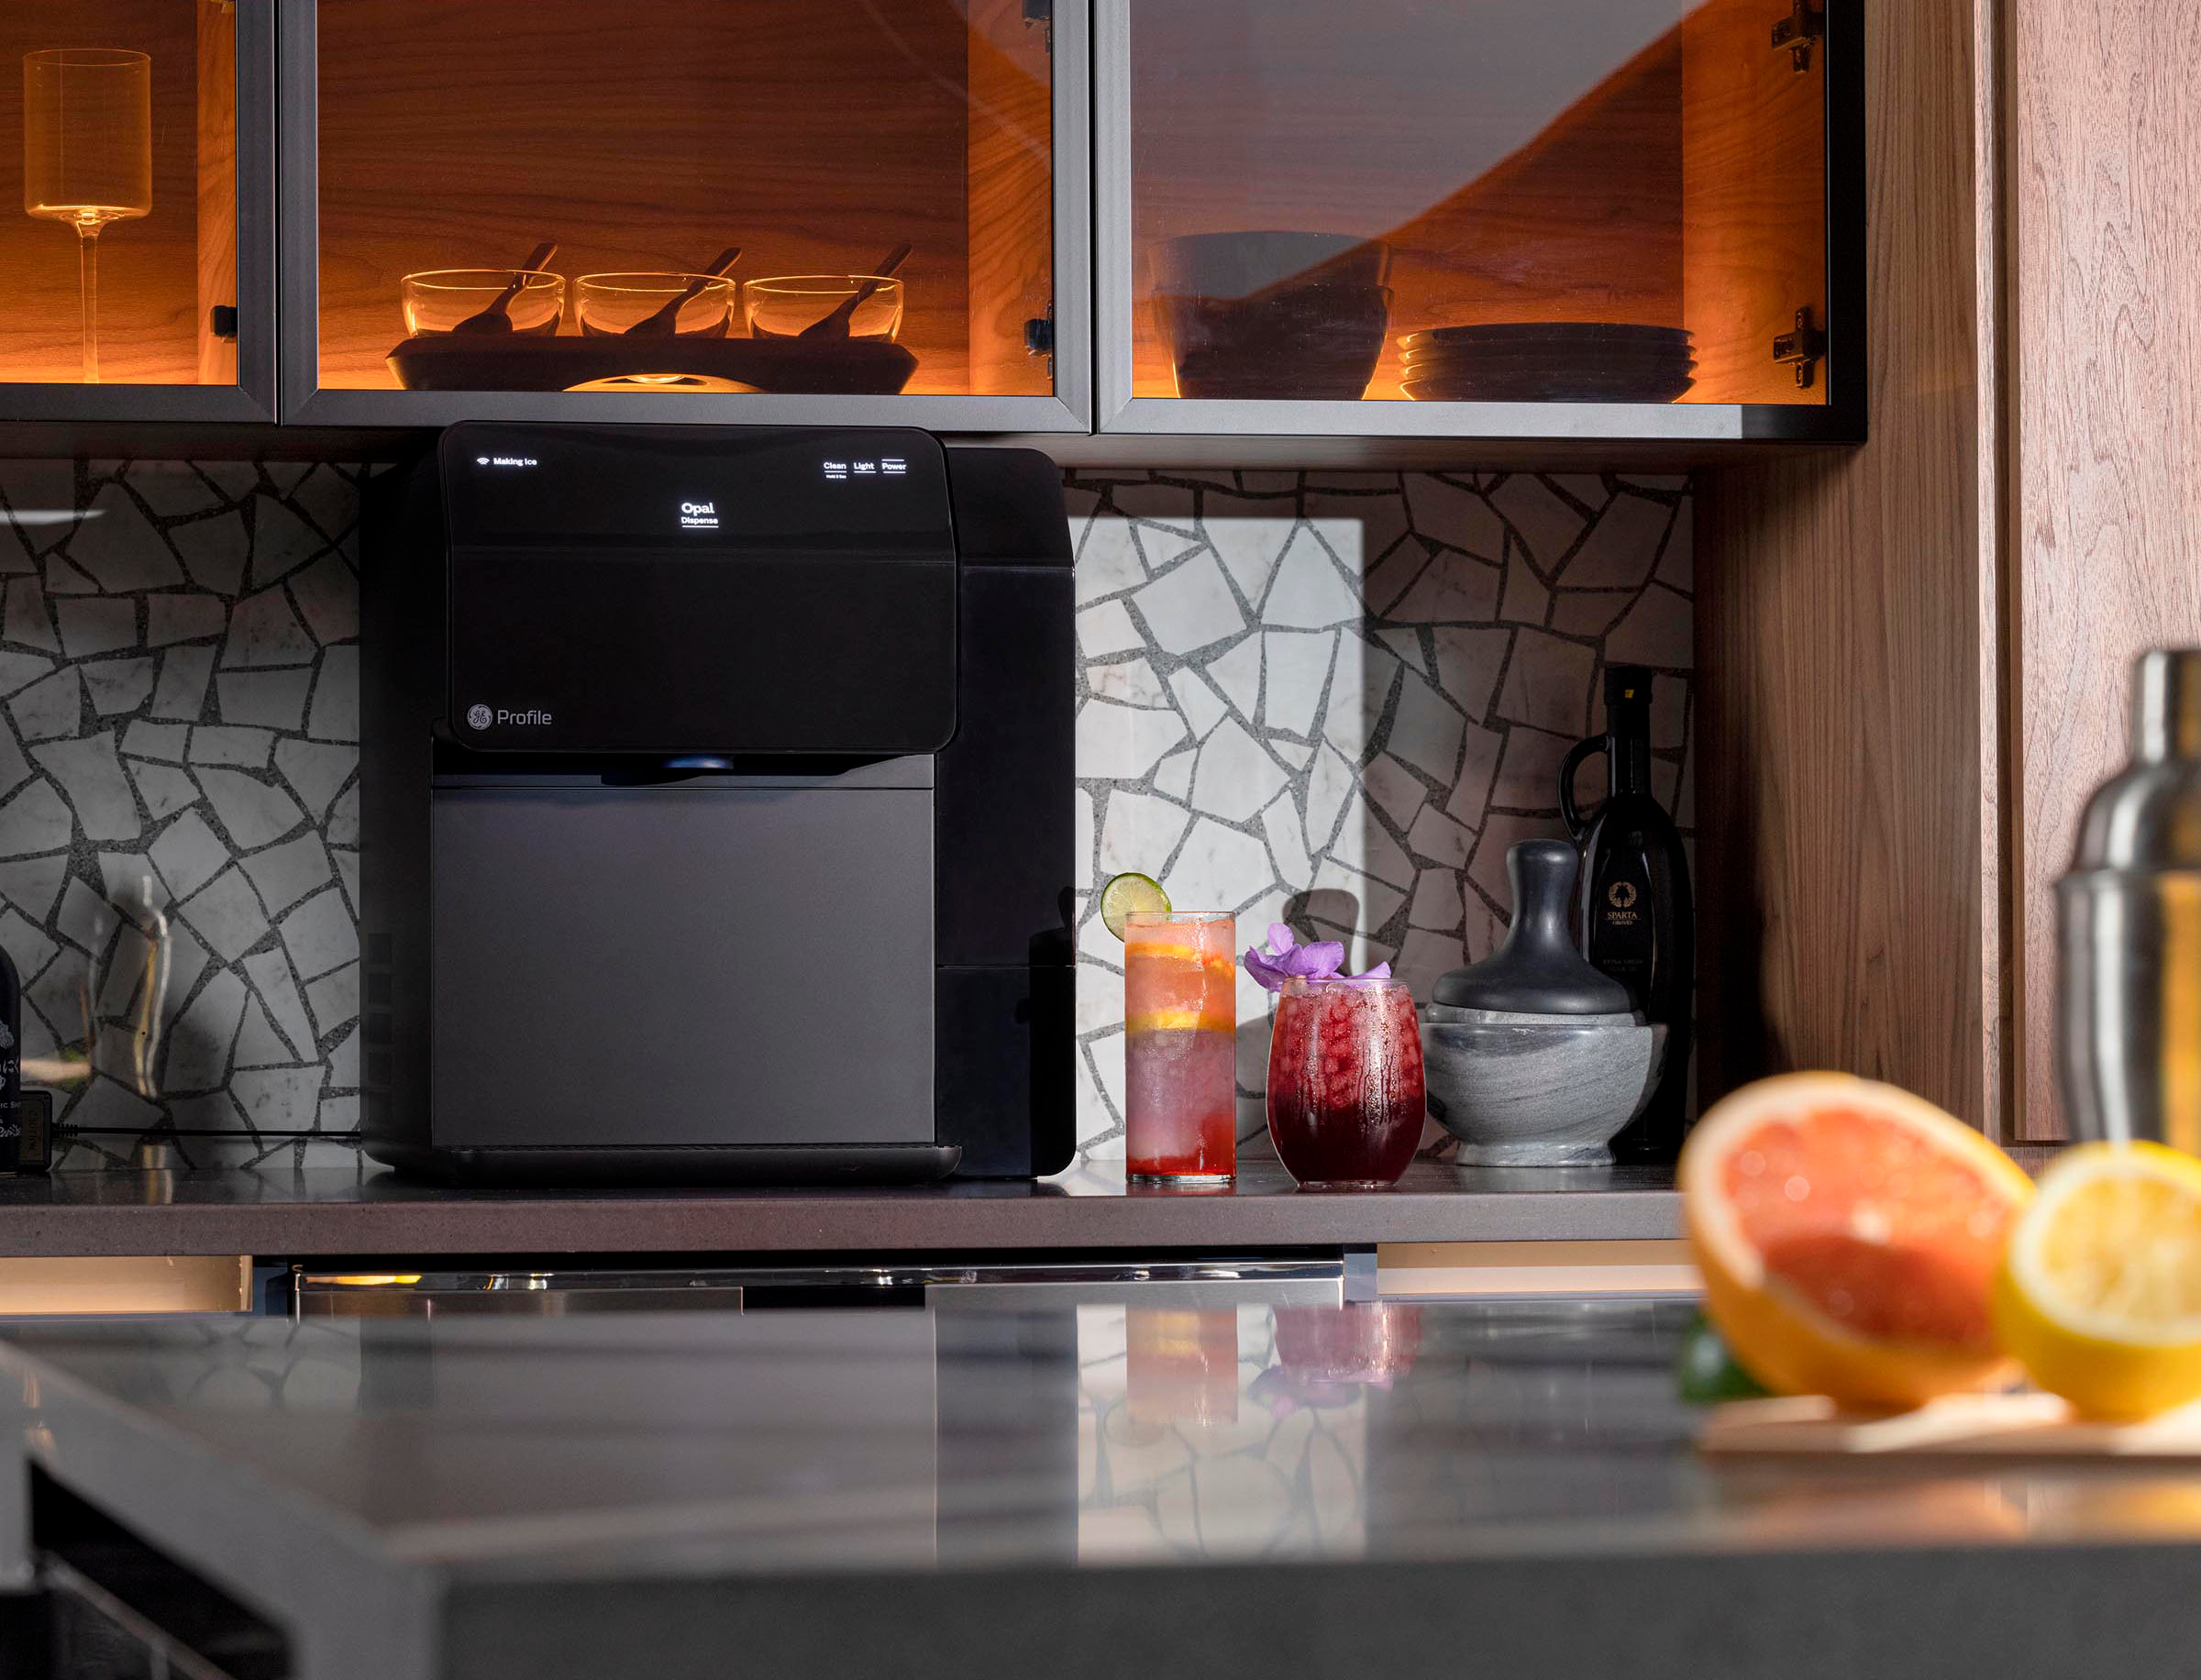 P4INDOS6RBB by GE Appliances - GE Profile™ Opal™ Nugget Ice Maker Dispenser